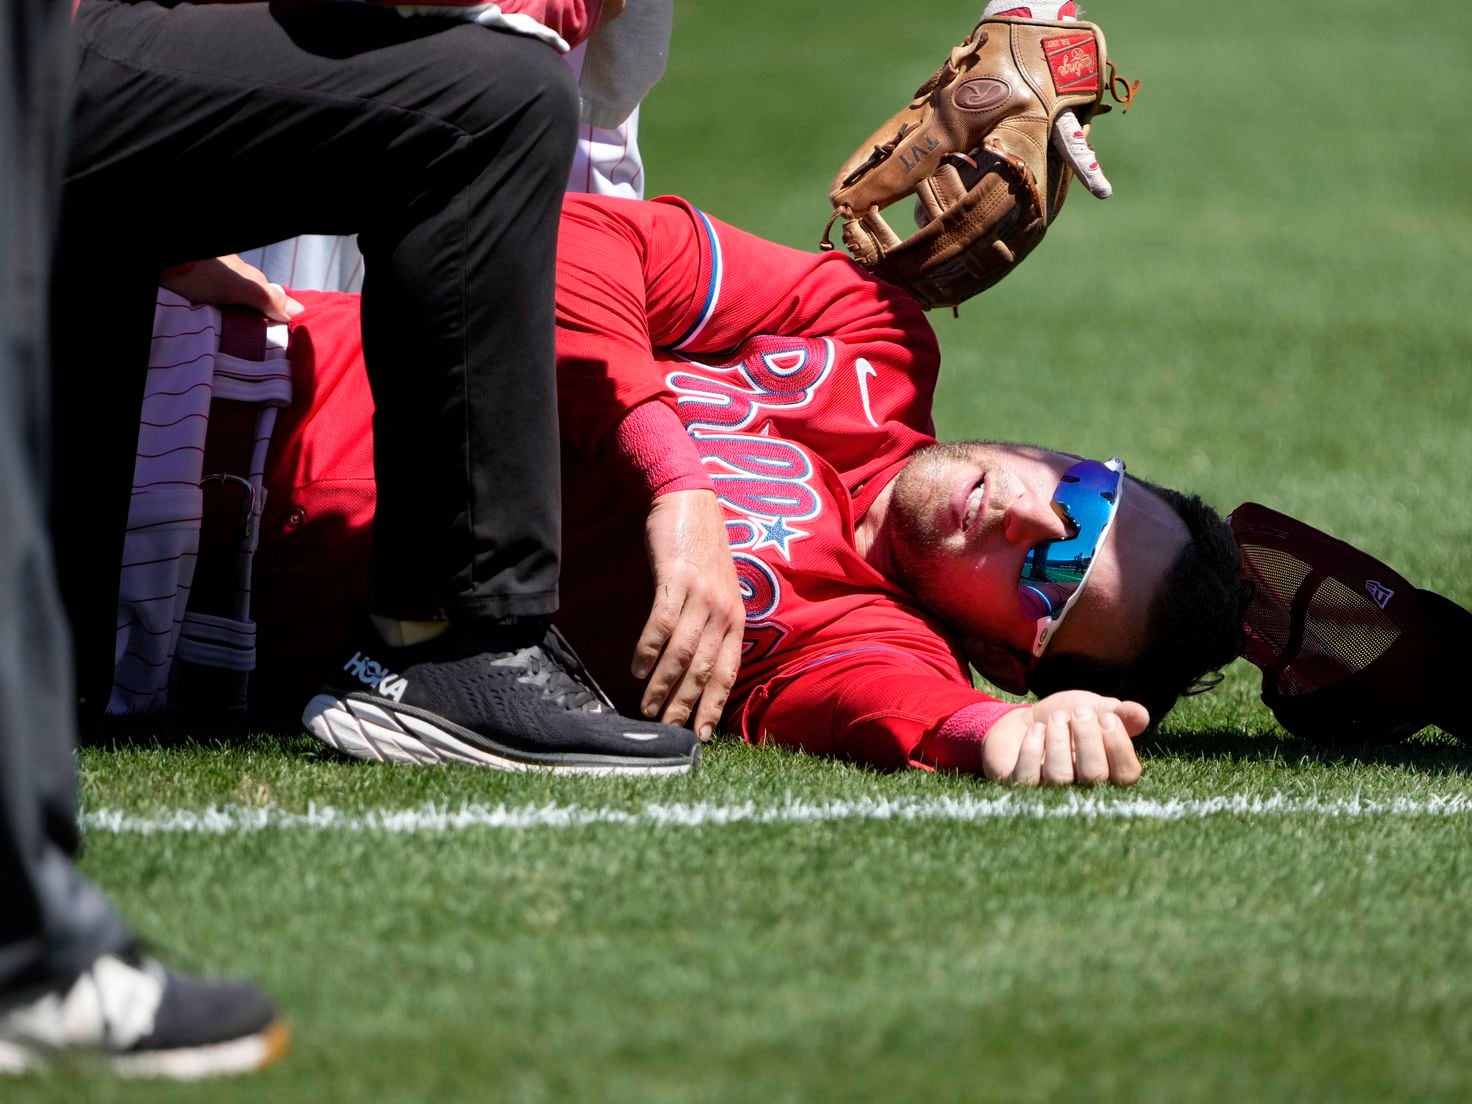 Phillies' Rhys Hoskins OK after being hit by pitch on hand, could